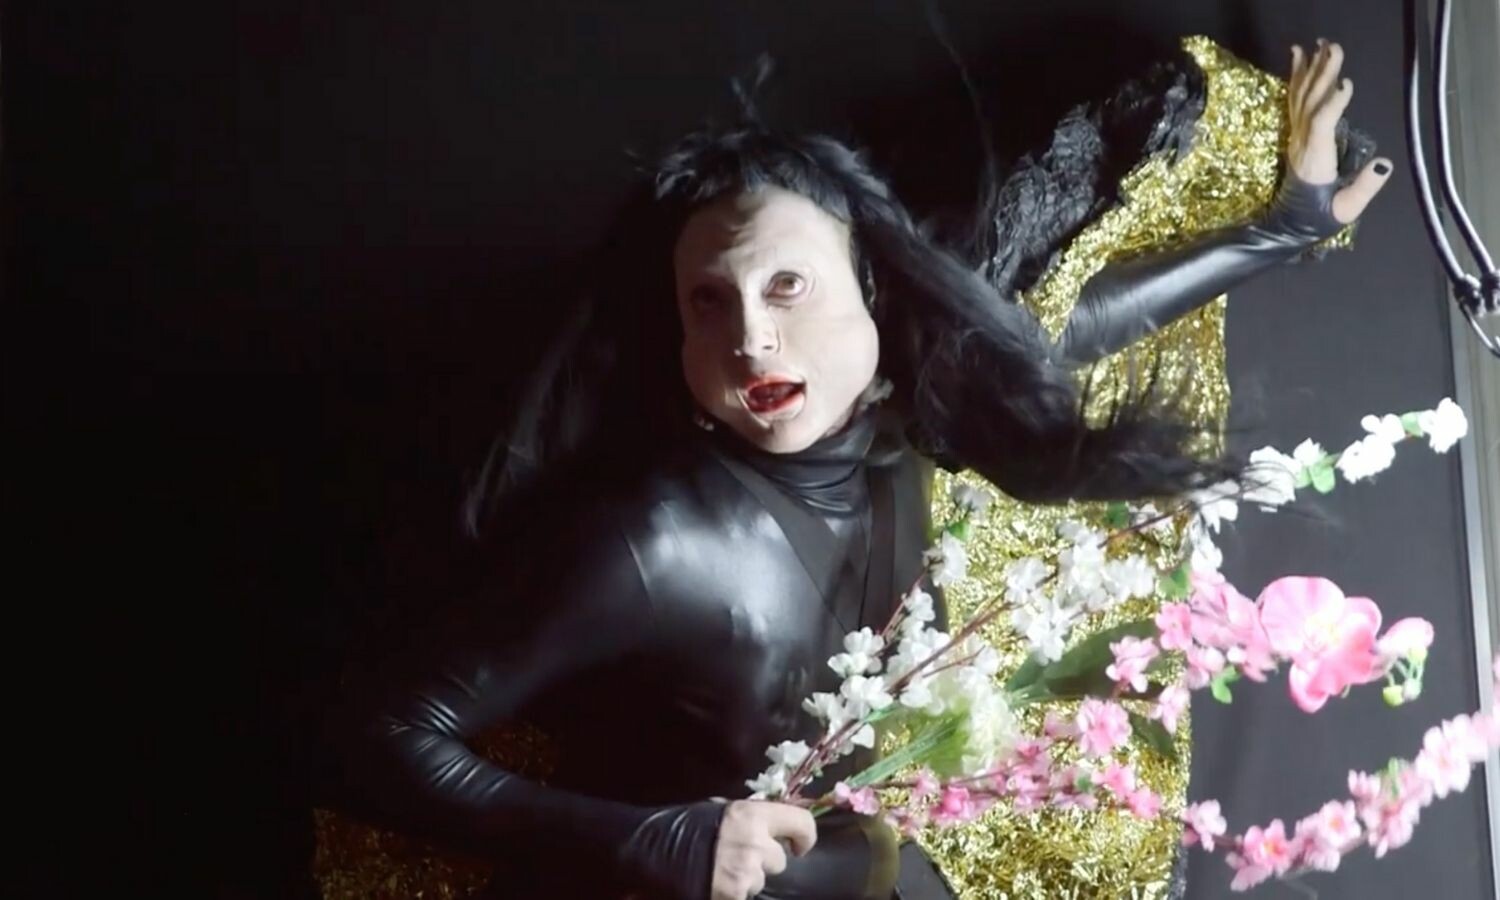 An actor with long black hair in a leather bodysuit, wearing black nail polish and holding flowers.